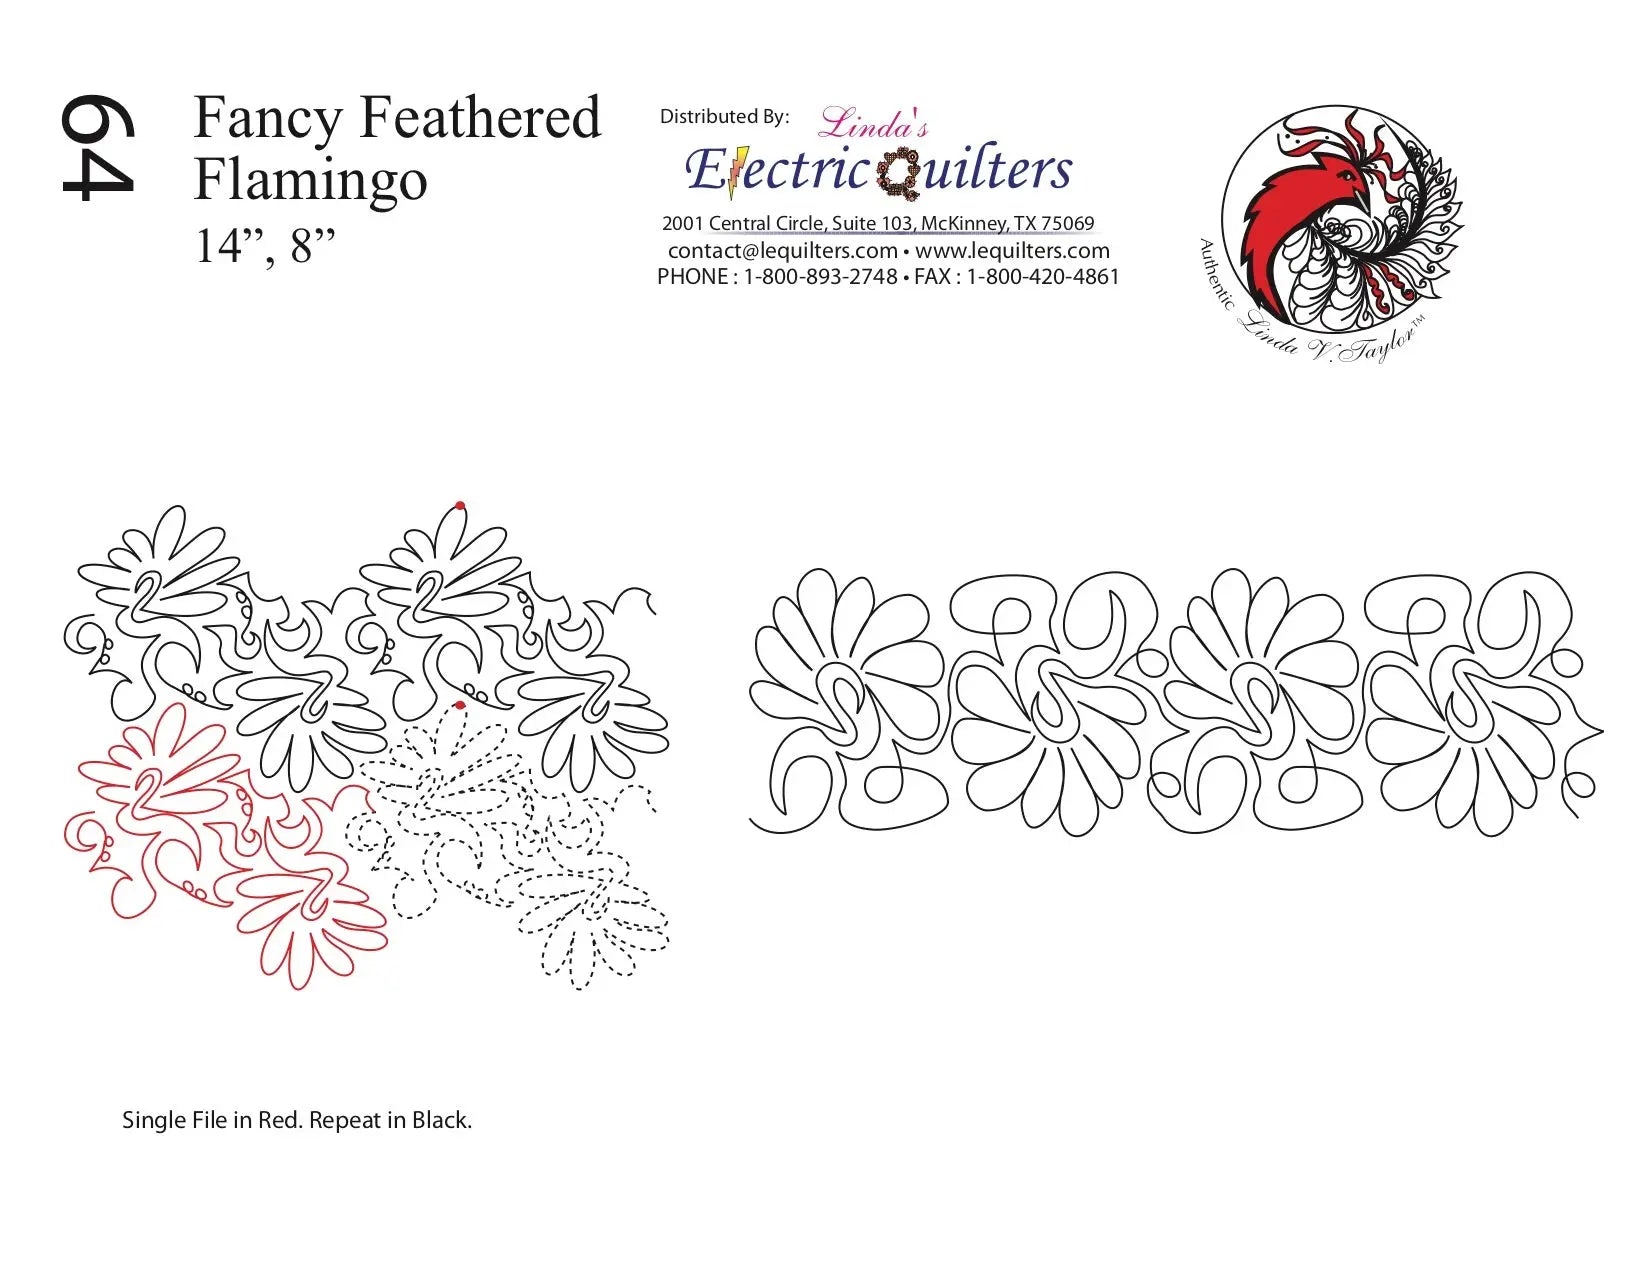 064 Fancy Feathered Flamingo Pantograph by Linda V. Taylor - Linda's Electric Quilters